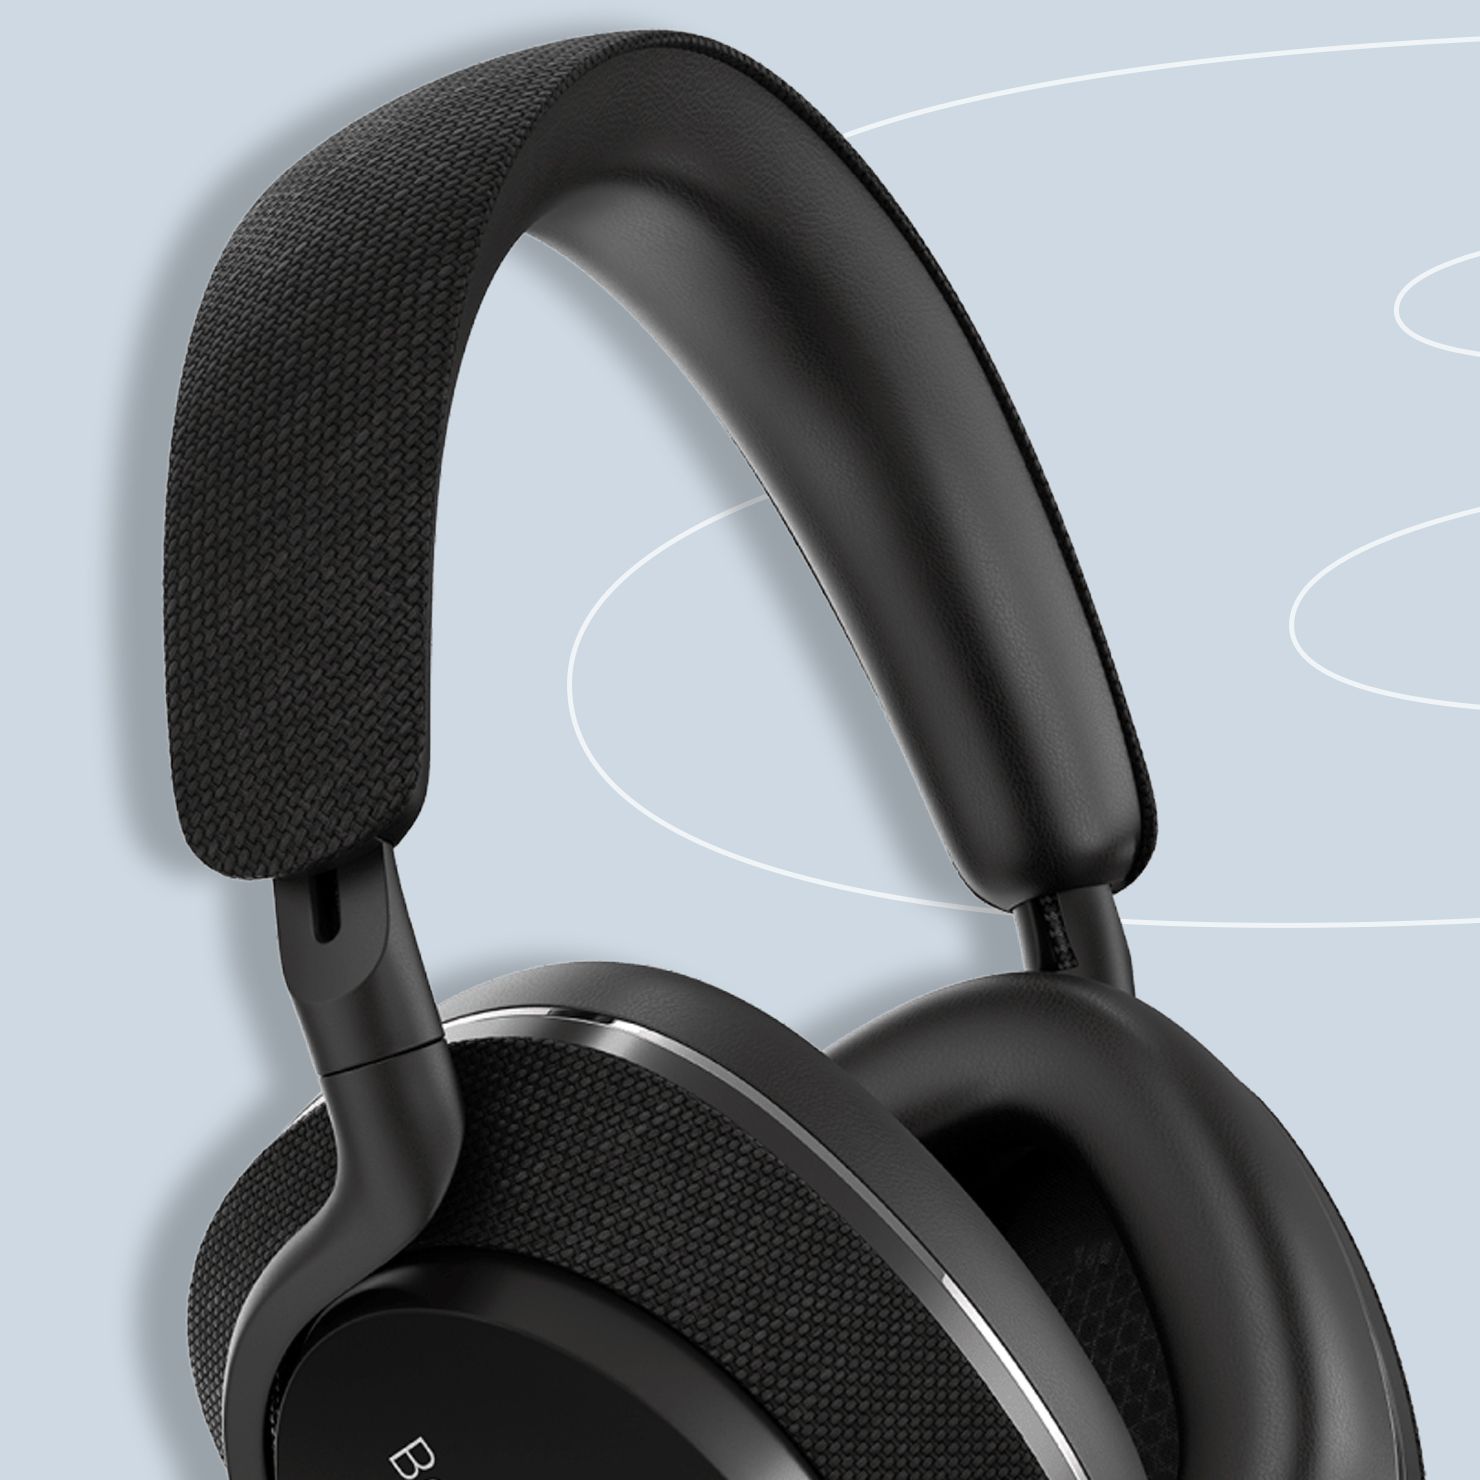 5 Pairs of Noise-Cancelling Headphones to Help You Block Out the World